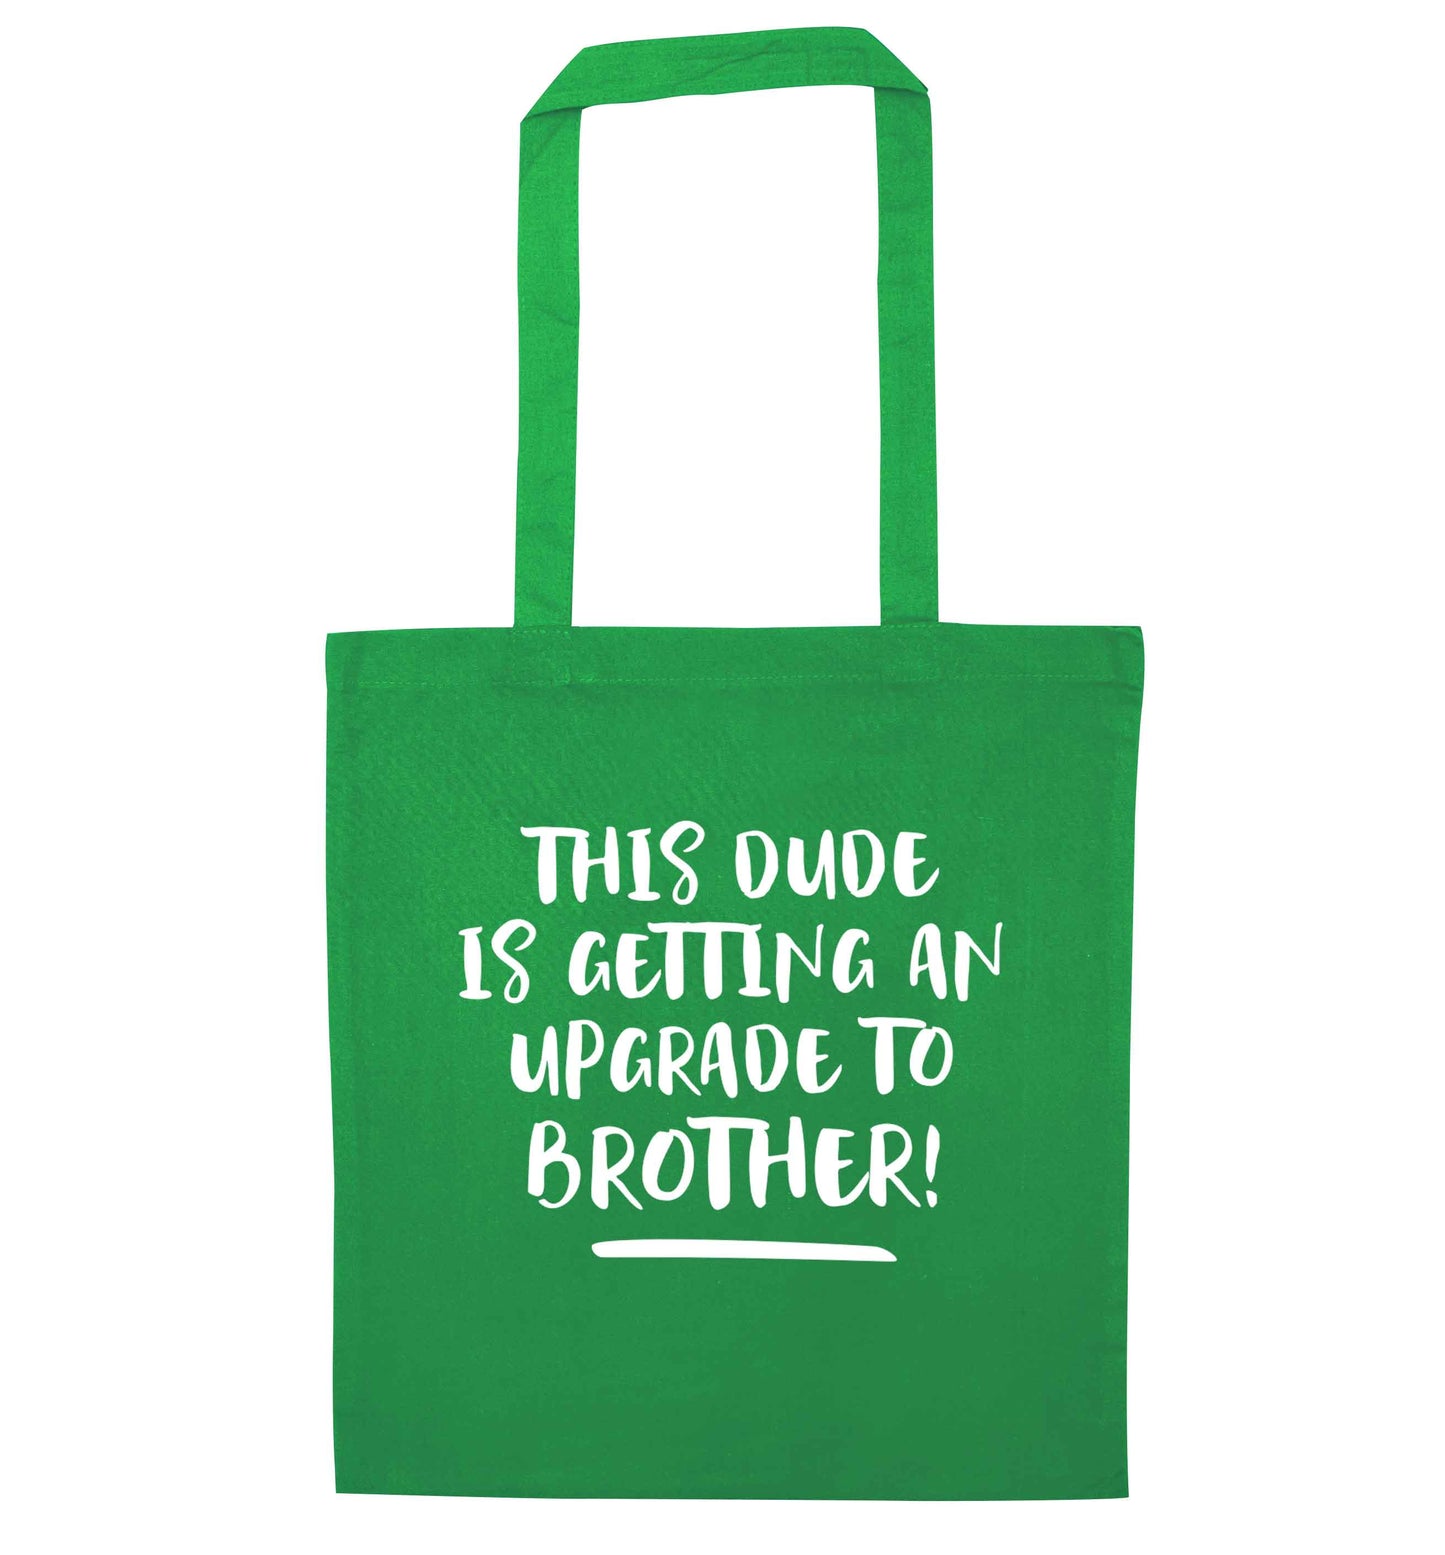 This dude is getting an upgrade to brother! green tote bag